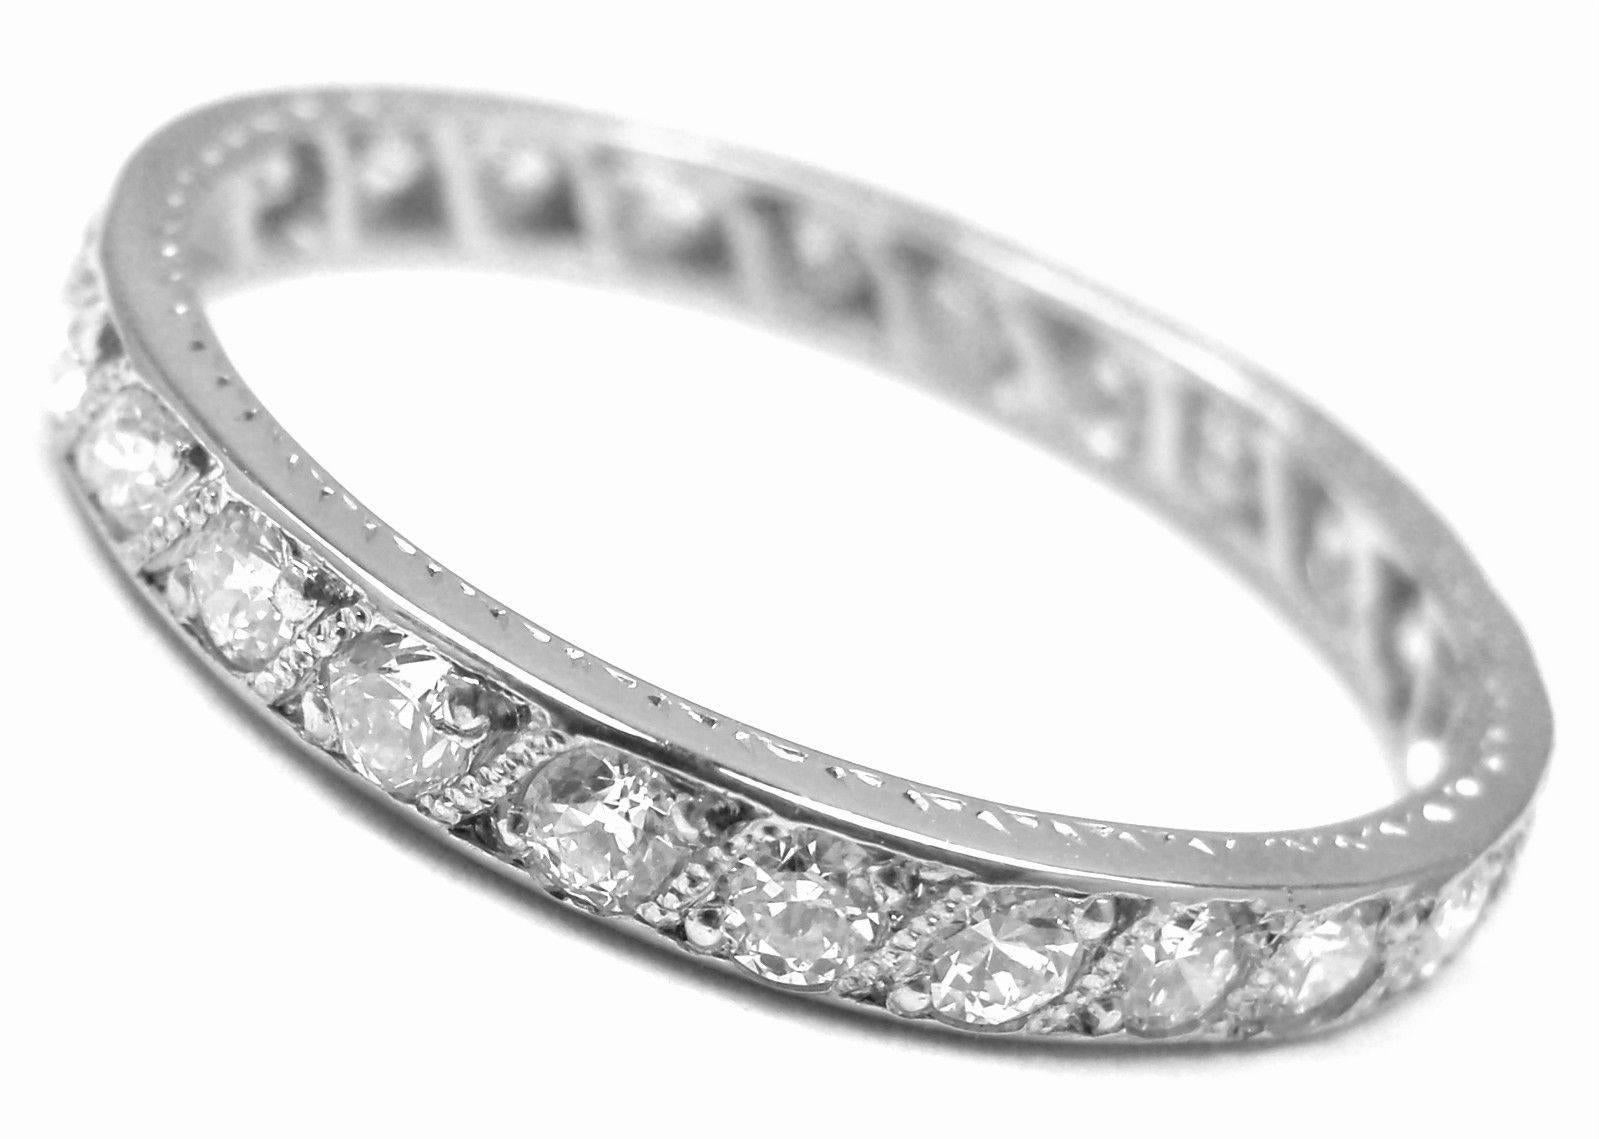 Vintage Platinum Diamond Eternity Wedding Band Ring by Tiffany & Co.
With 26 round brilliant cut diamonds VVS1 clarity, E color total weight approx. .52ct
Measurements: 
Ring Size: 6 1/4
Weight: 2.1 grams
Band Width: 2.5mm
Stamped Hallmarks: Tiffany